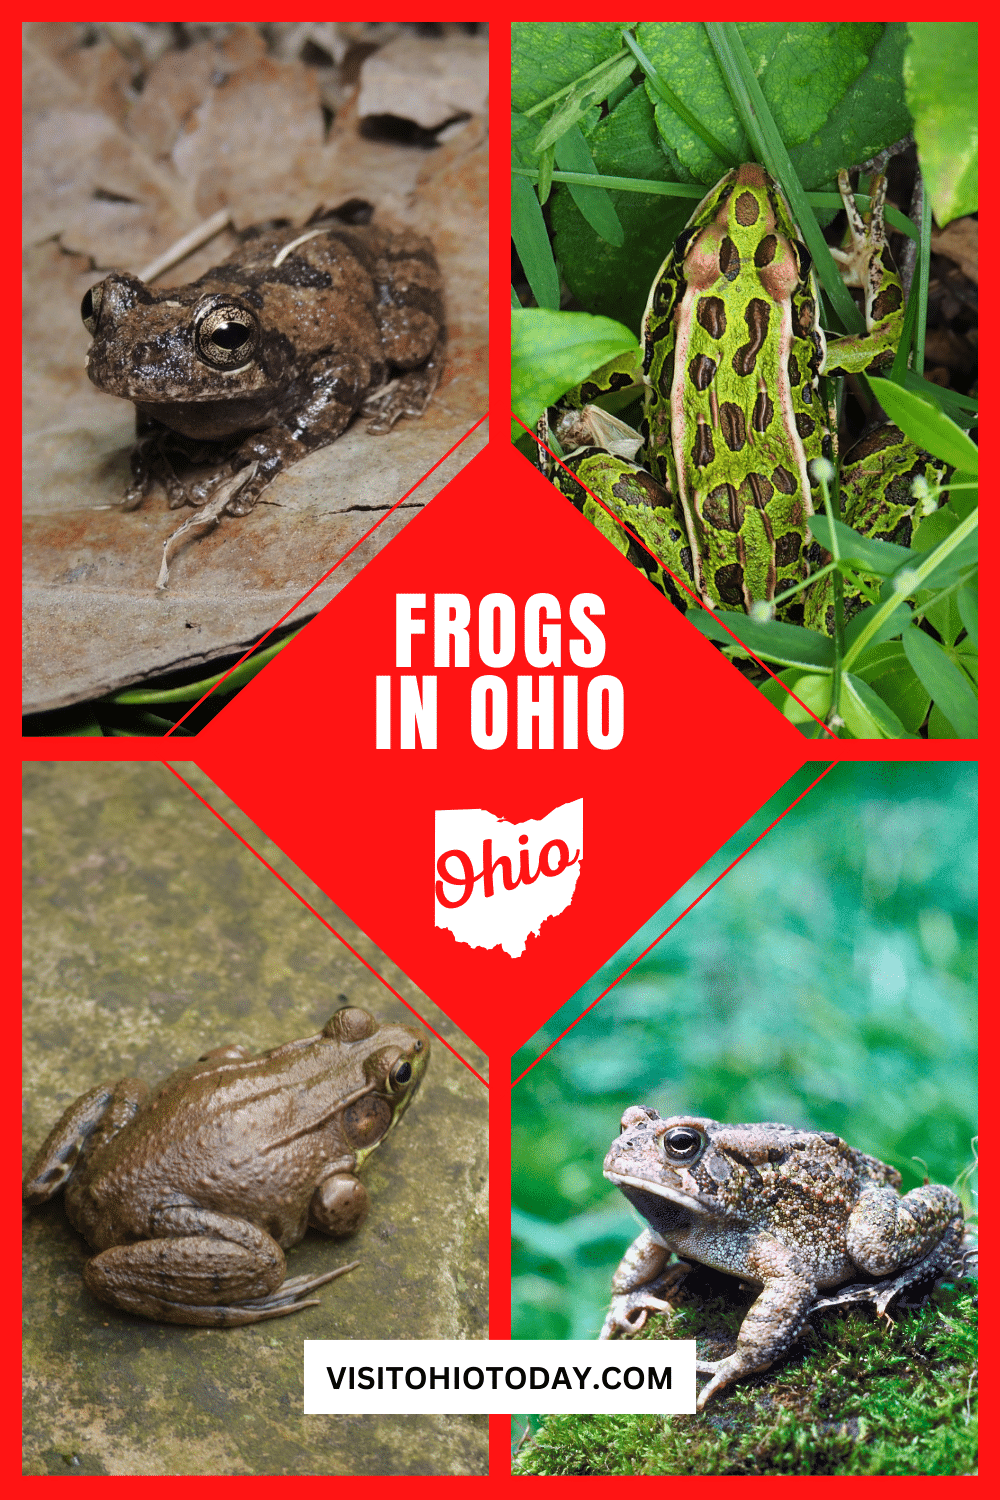 Ohio is home to at least 15 species of frogs and toads. If you are looking for ways to help identify Frogs in Ohio, this is a simple guide to help you spot which frog is which, with photos.